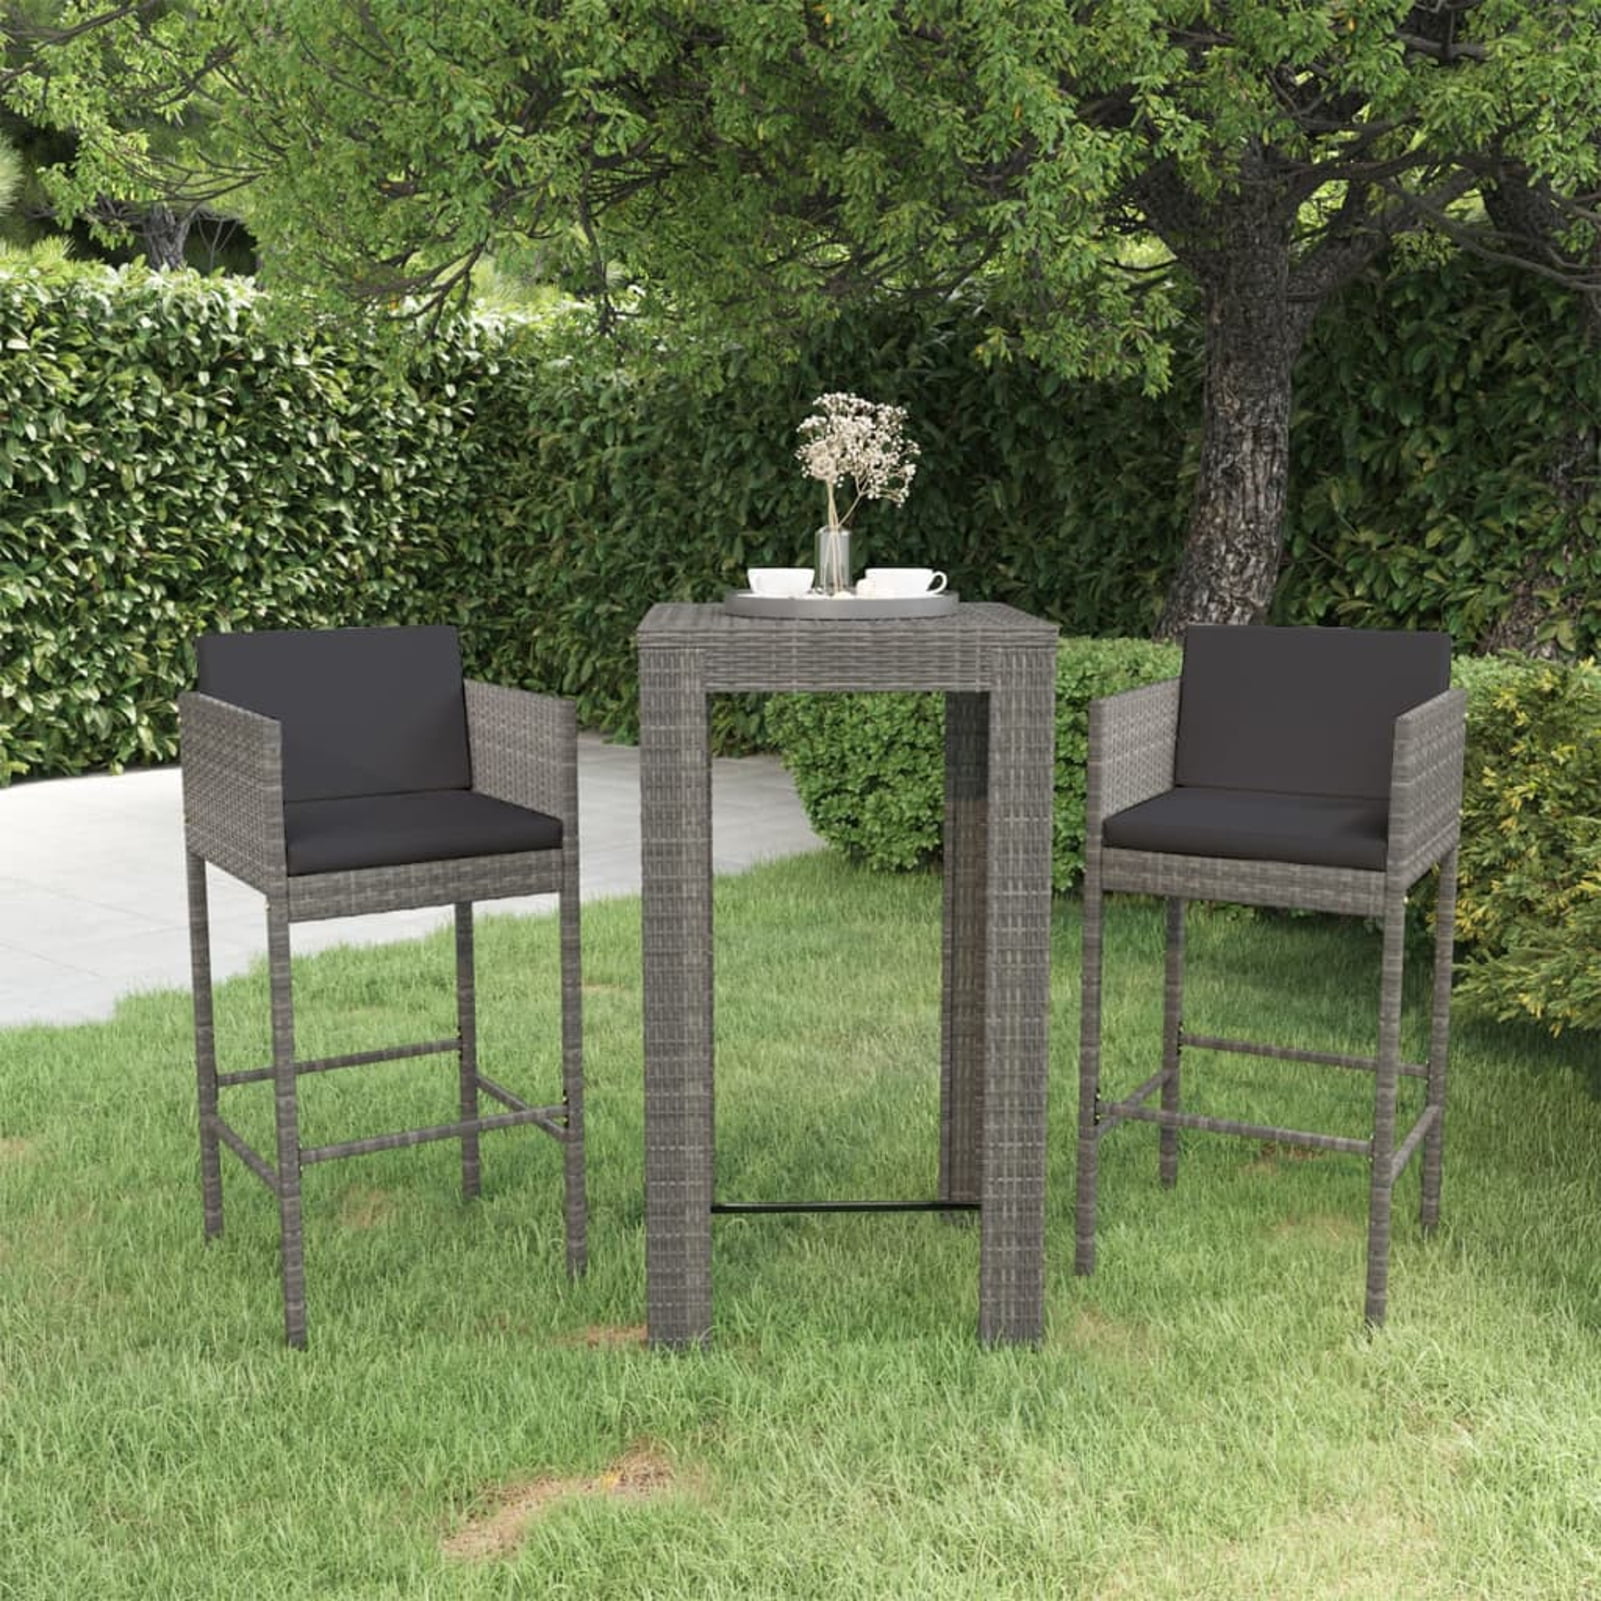 Details about   Set of 4 Outdoor Barstool Wicker Patio Furniture Bar Stool 330lbs Capacity Brown 